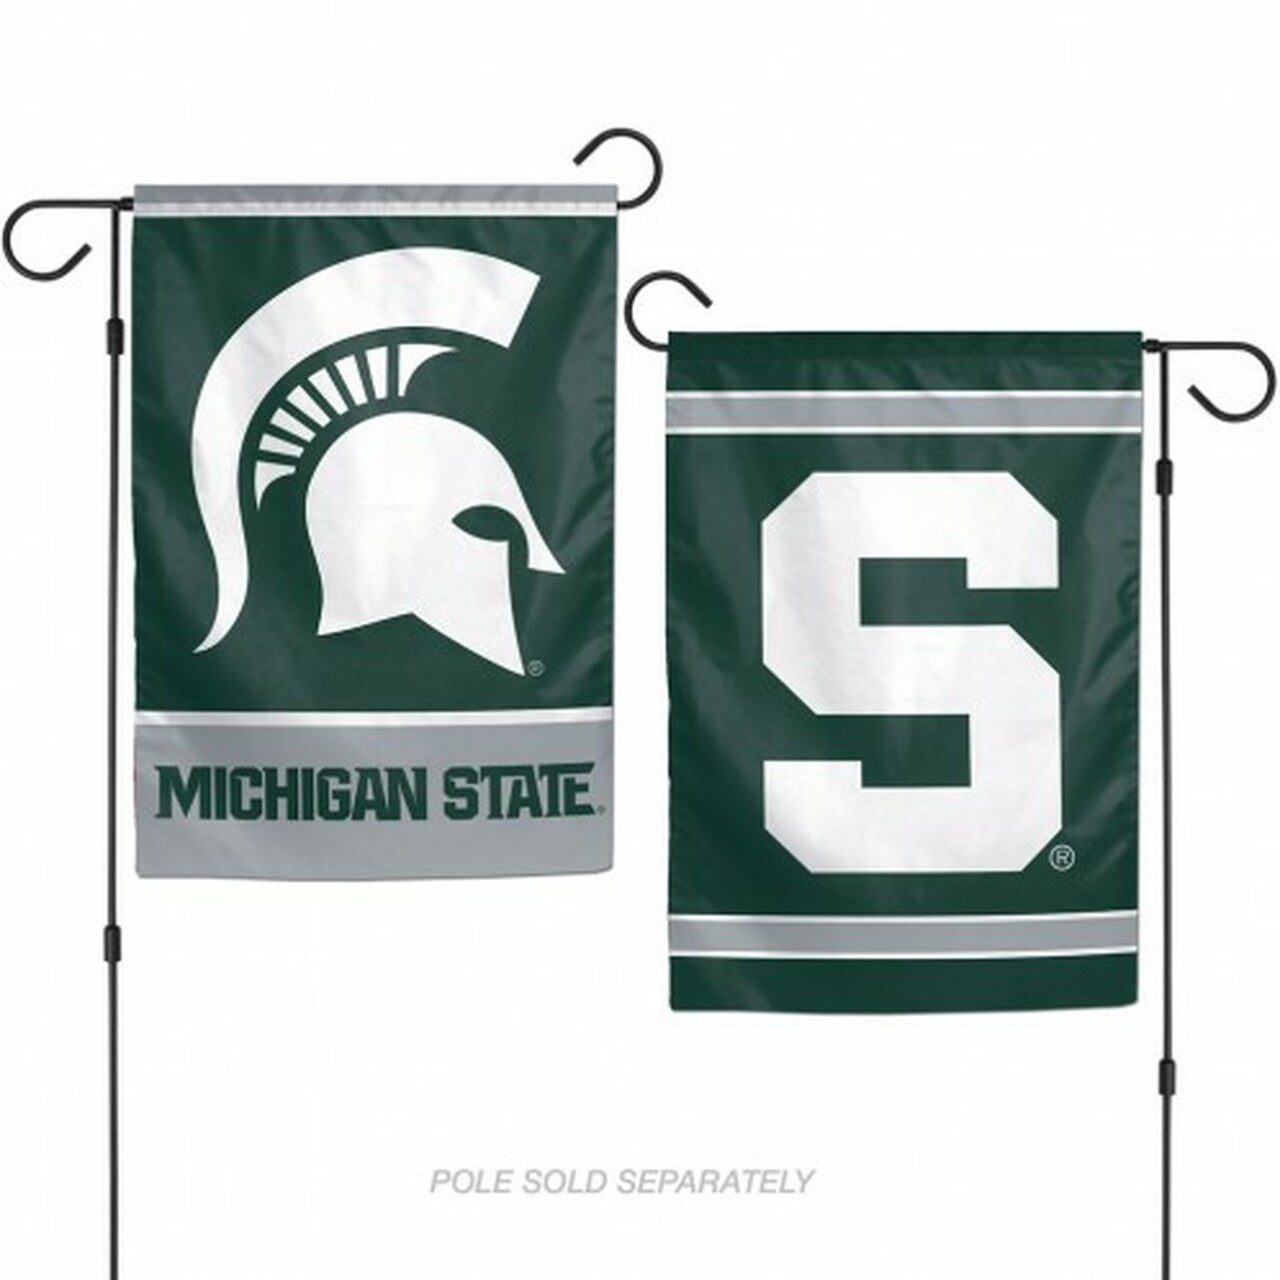 Michigan State Spartans 12" x 18" Garden Flag 2 Sided by Wincraft